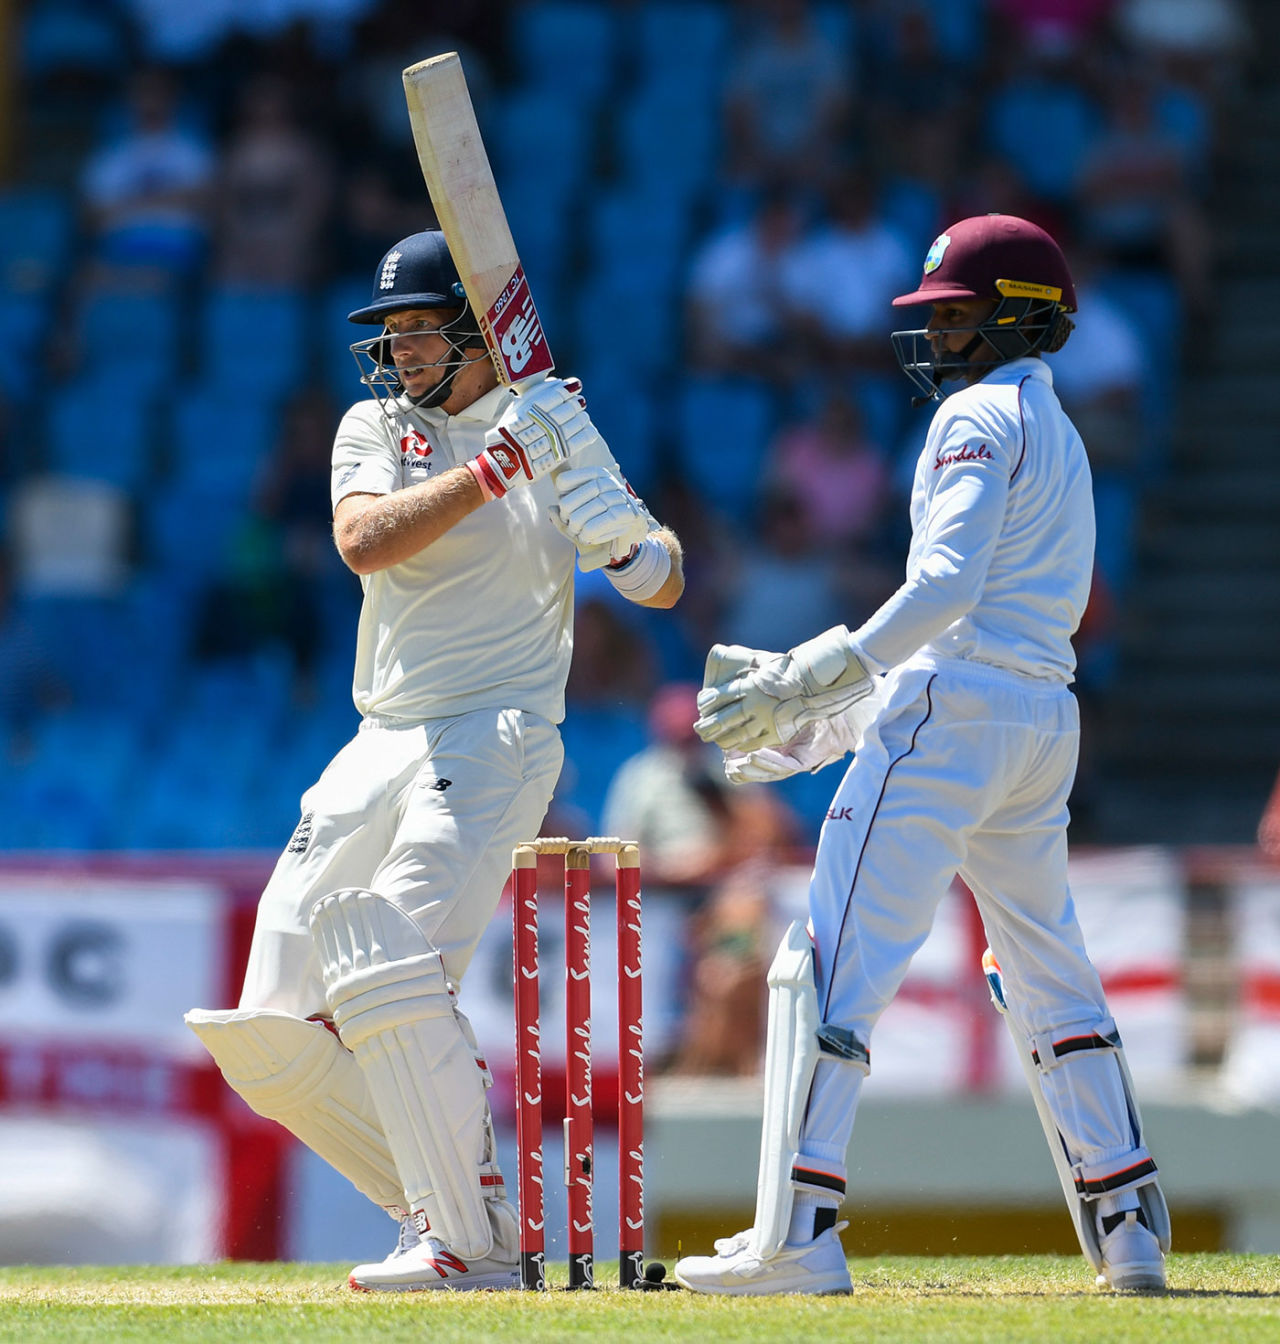 Joe Root pulls through the leg side, West Indies v England, 3rd Test, St Lucia, 3rd day, February 11, 2019